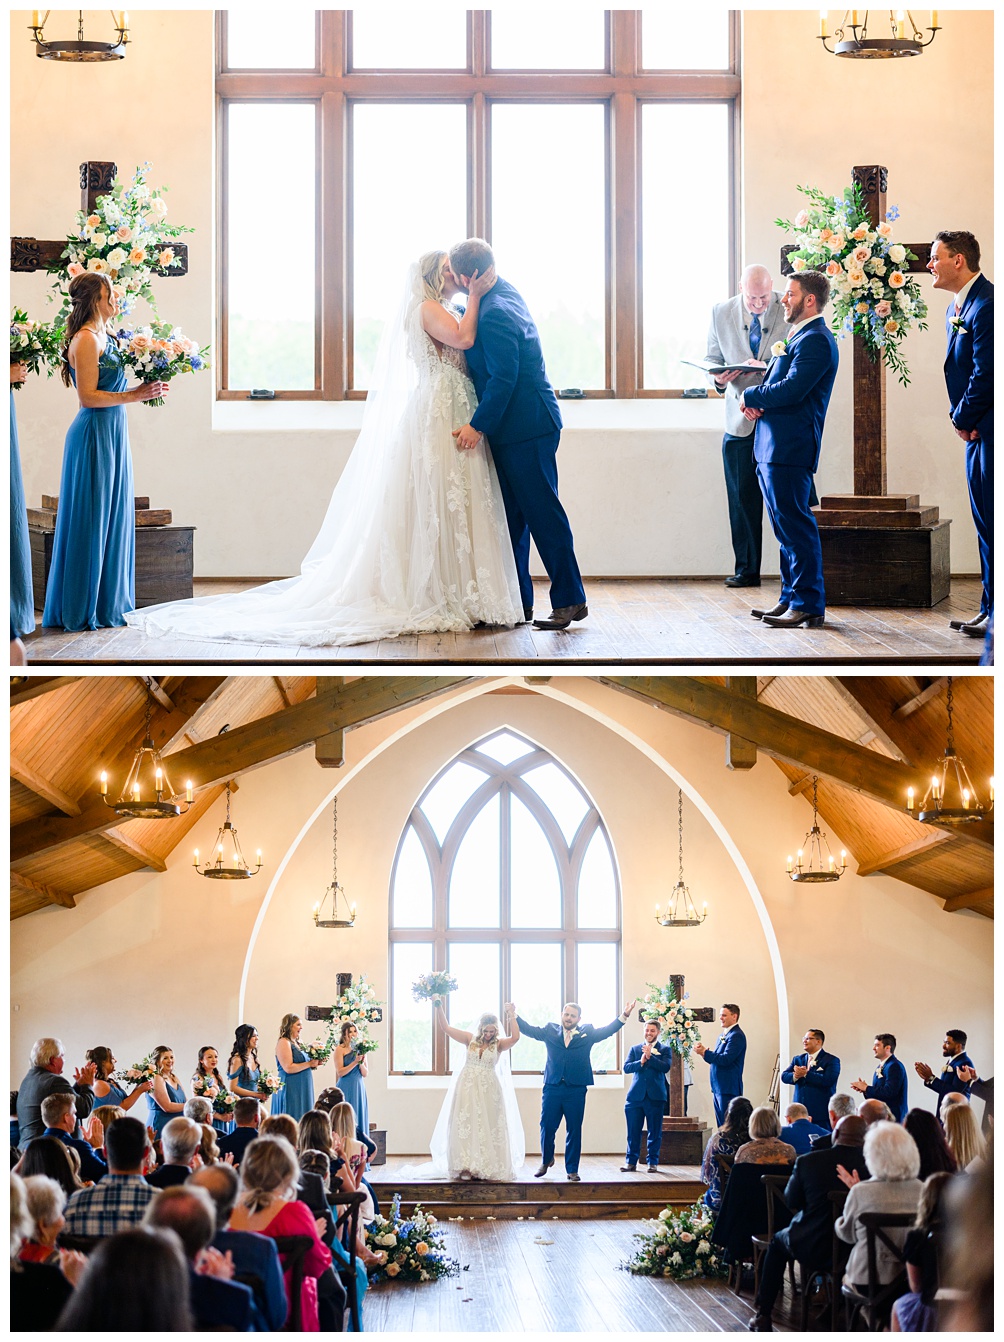 Hidden River Ranch Wedding Ceremony inside chapel at the foot of the cross